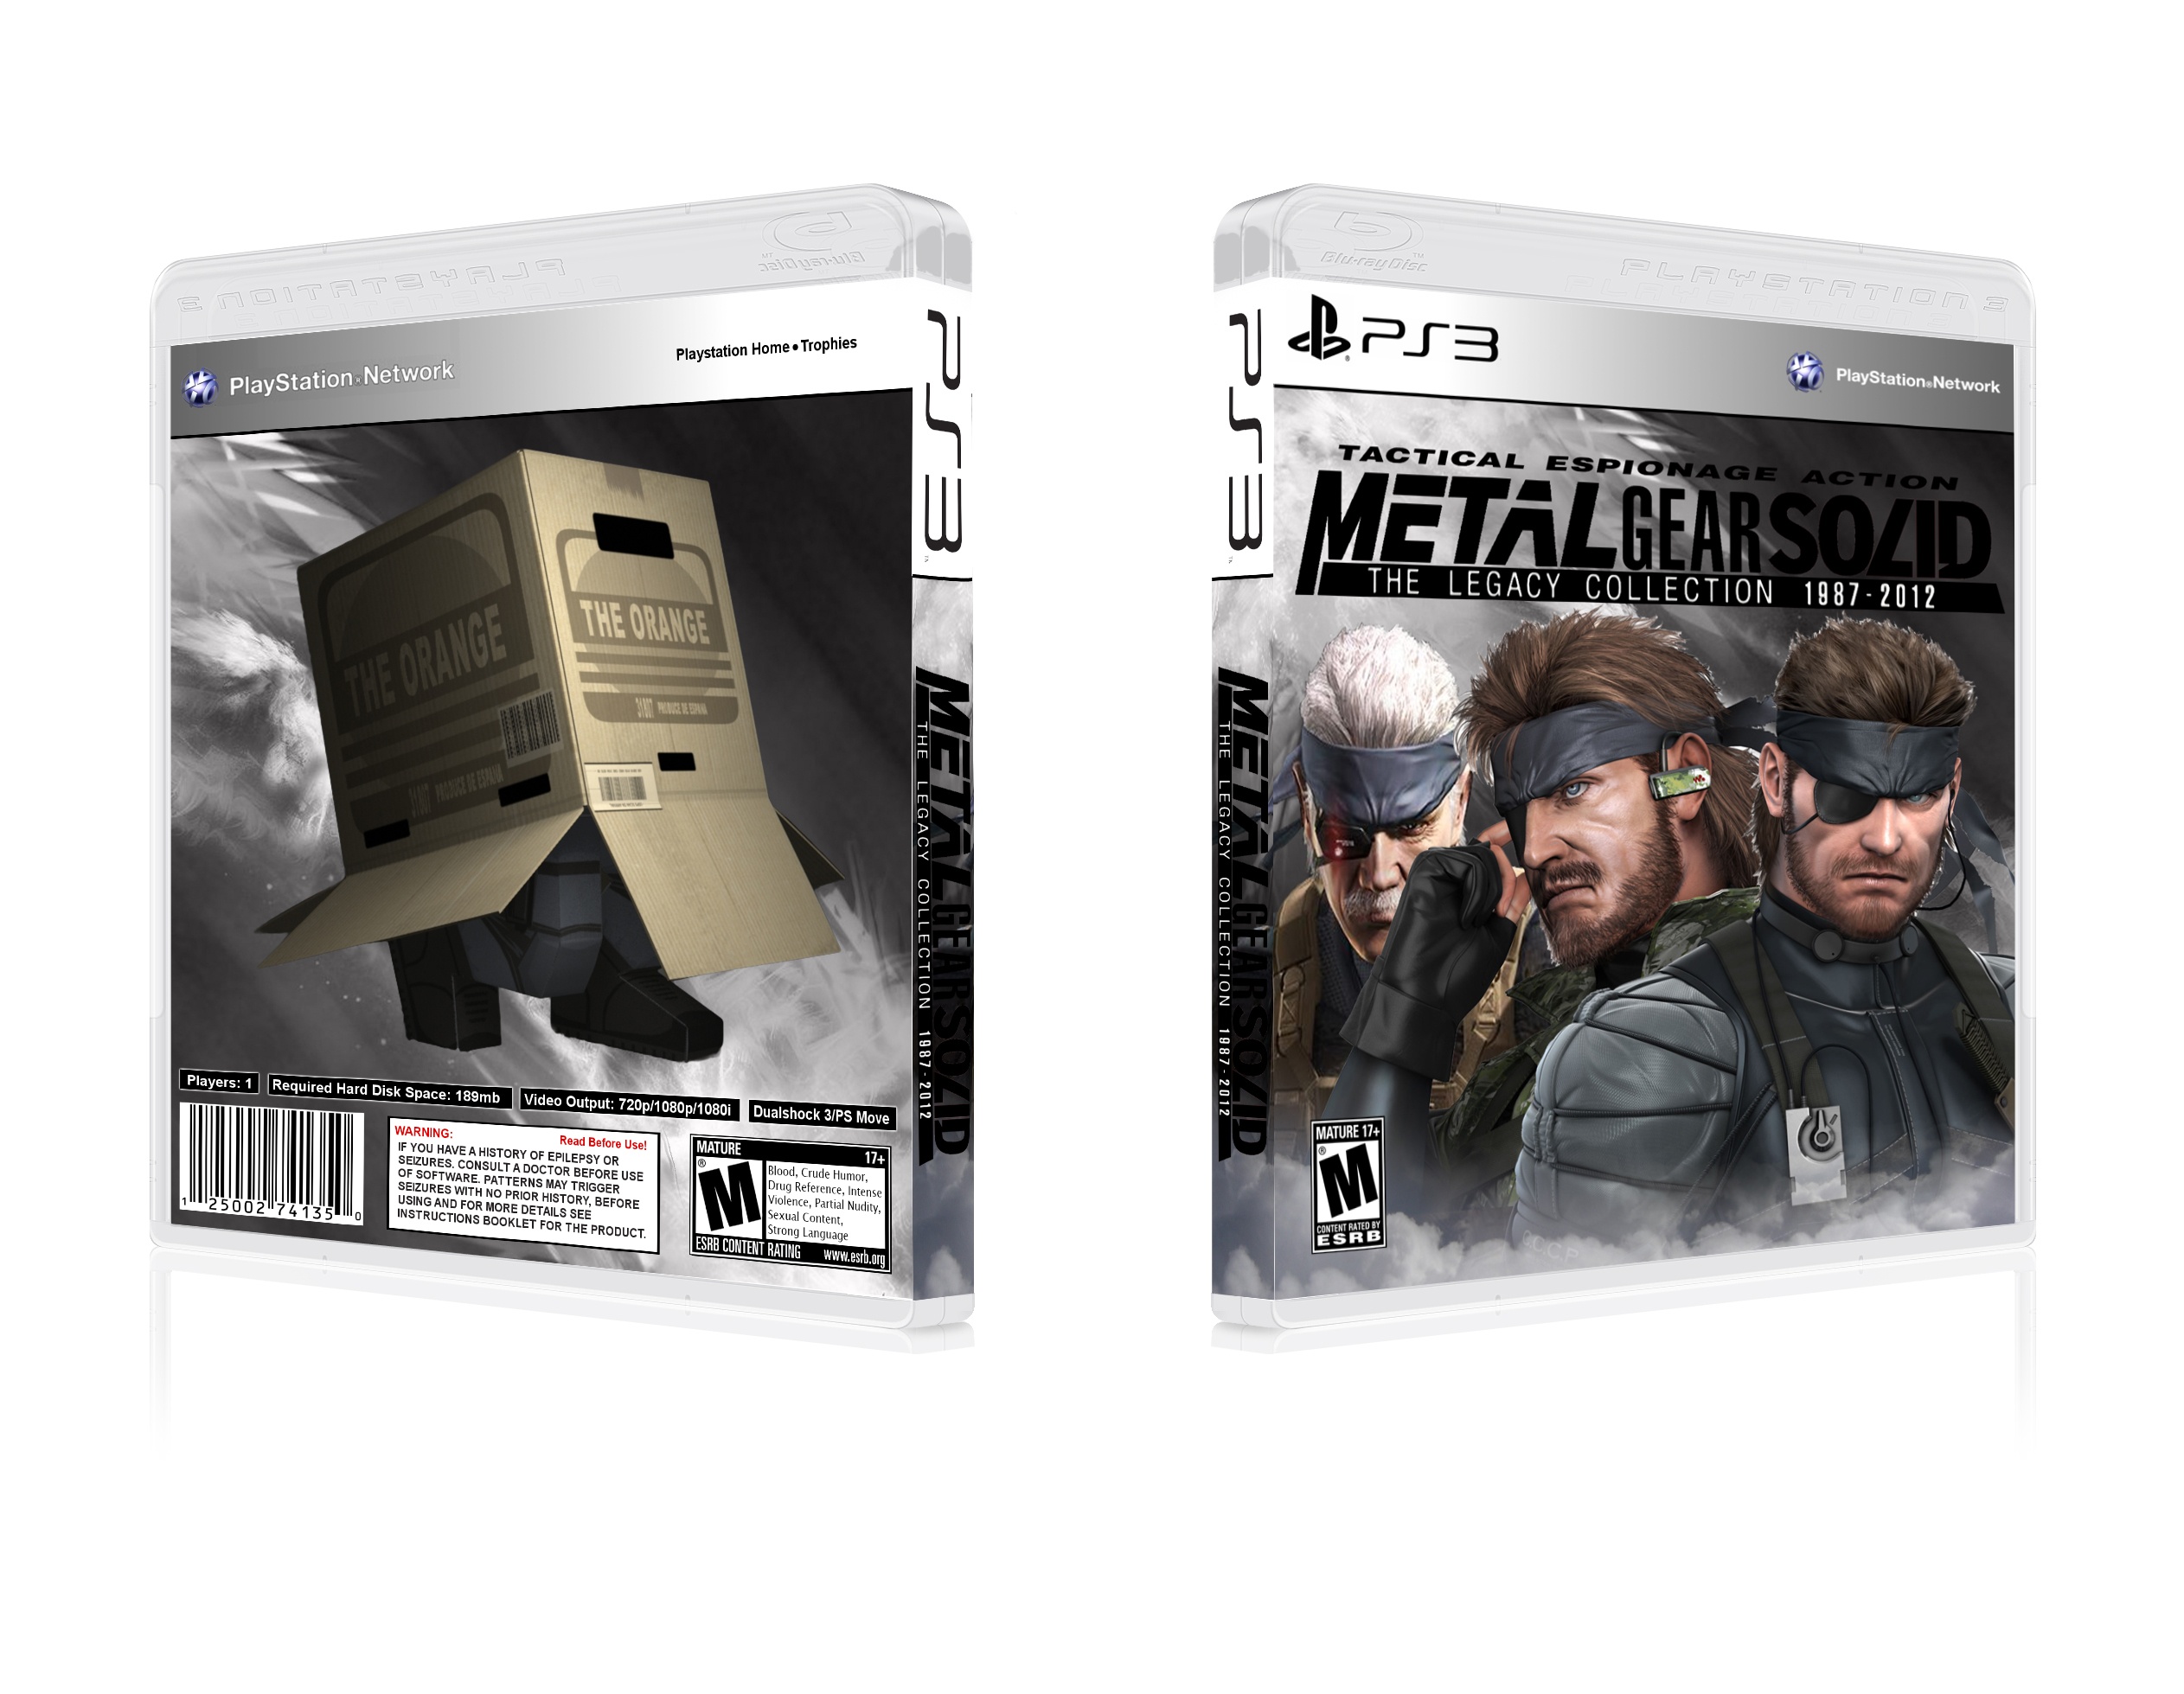 Metal Gear Solid: Legacy Collection box cover